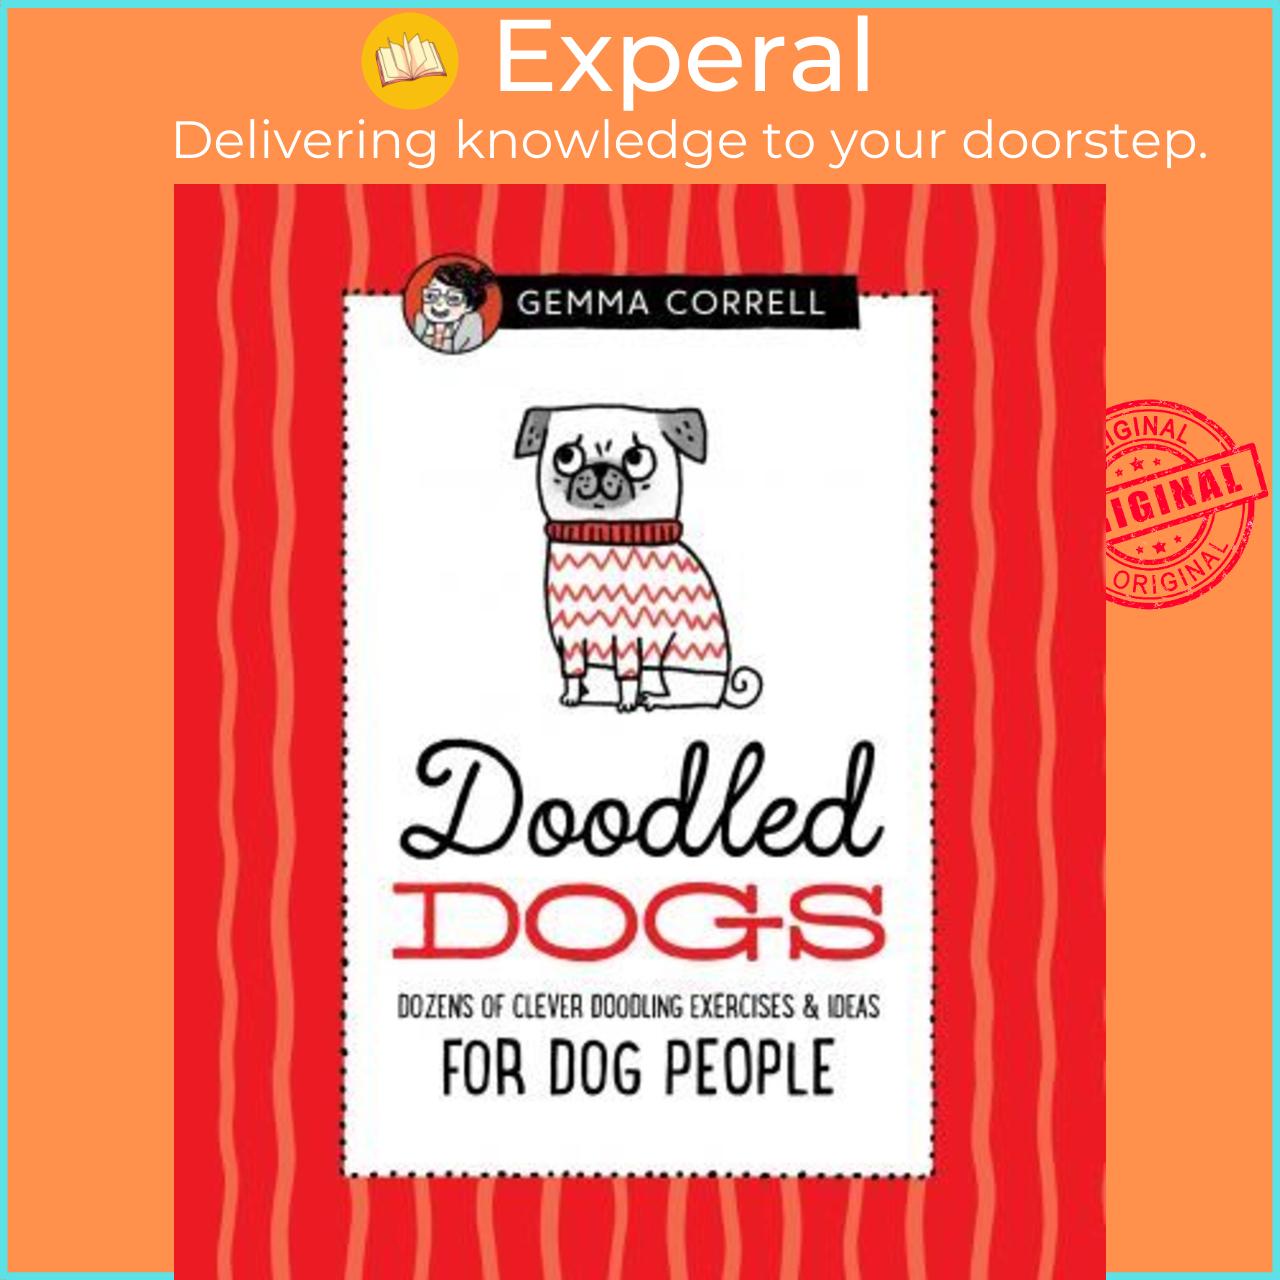 Sách - Doodled Dogs : Dozens of clever doodling exercises & ideas for dog peopl by Gemma Correll (US edition, hardcover)